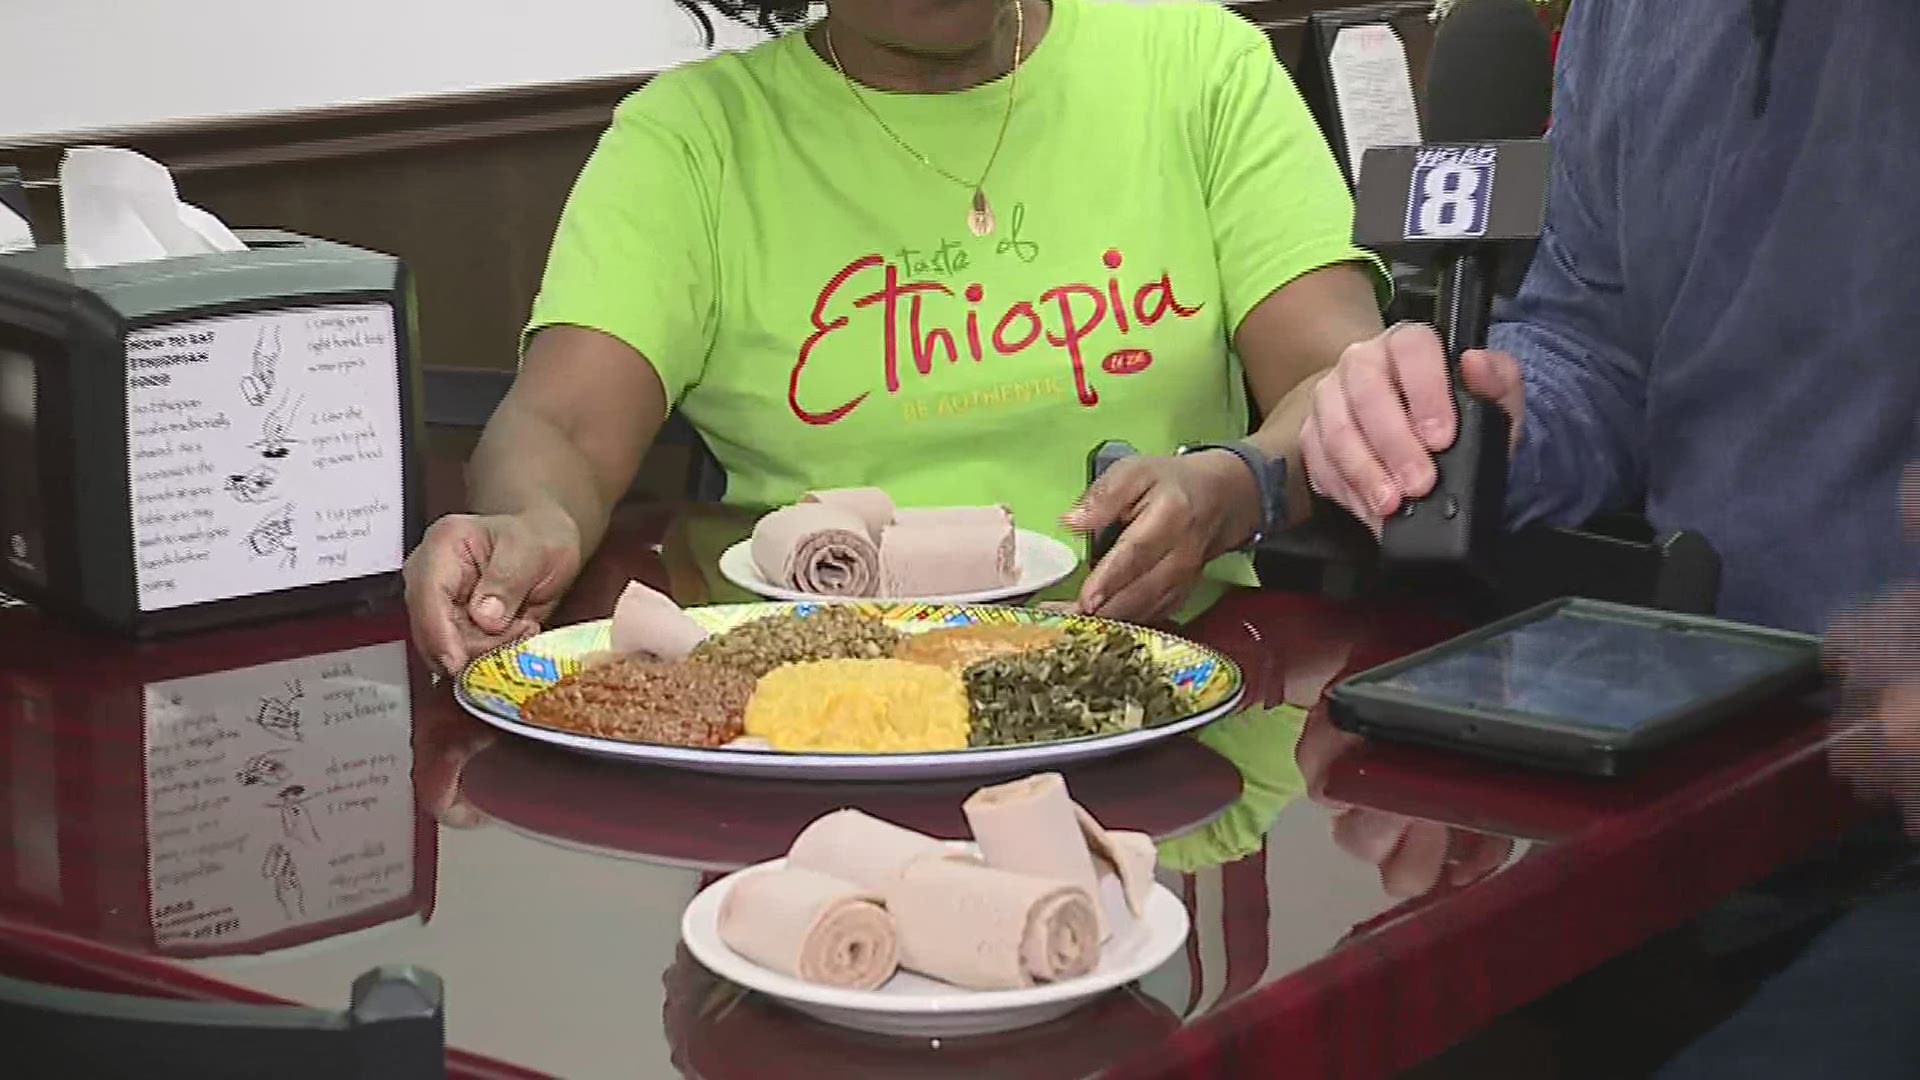 The Unique QC Restaurant Week Special You Can Get at Taste of Ethiopia in Davenport